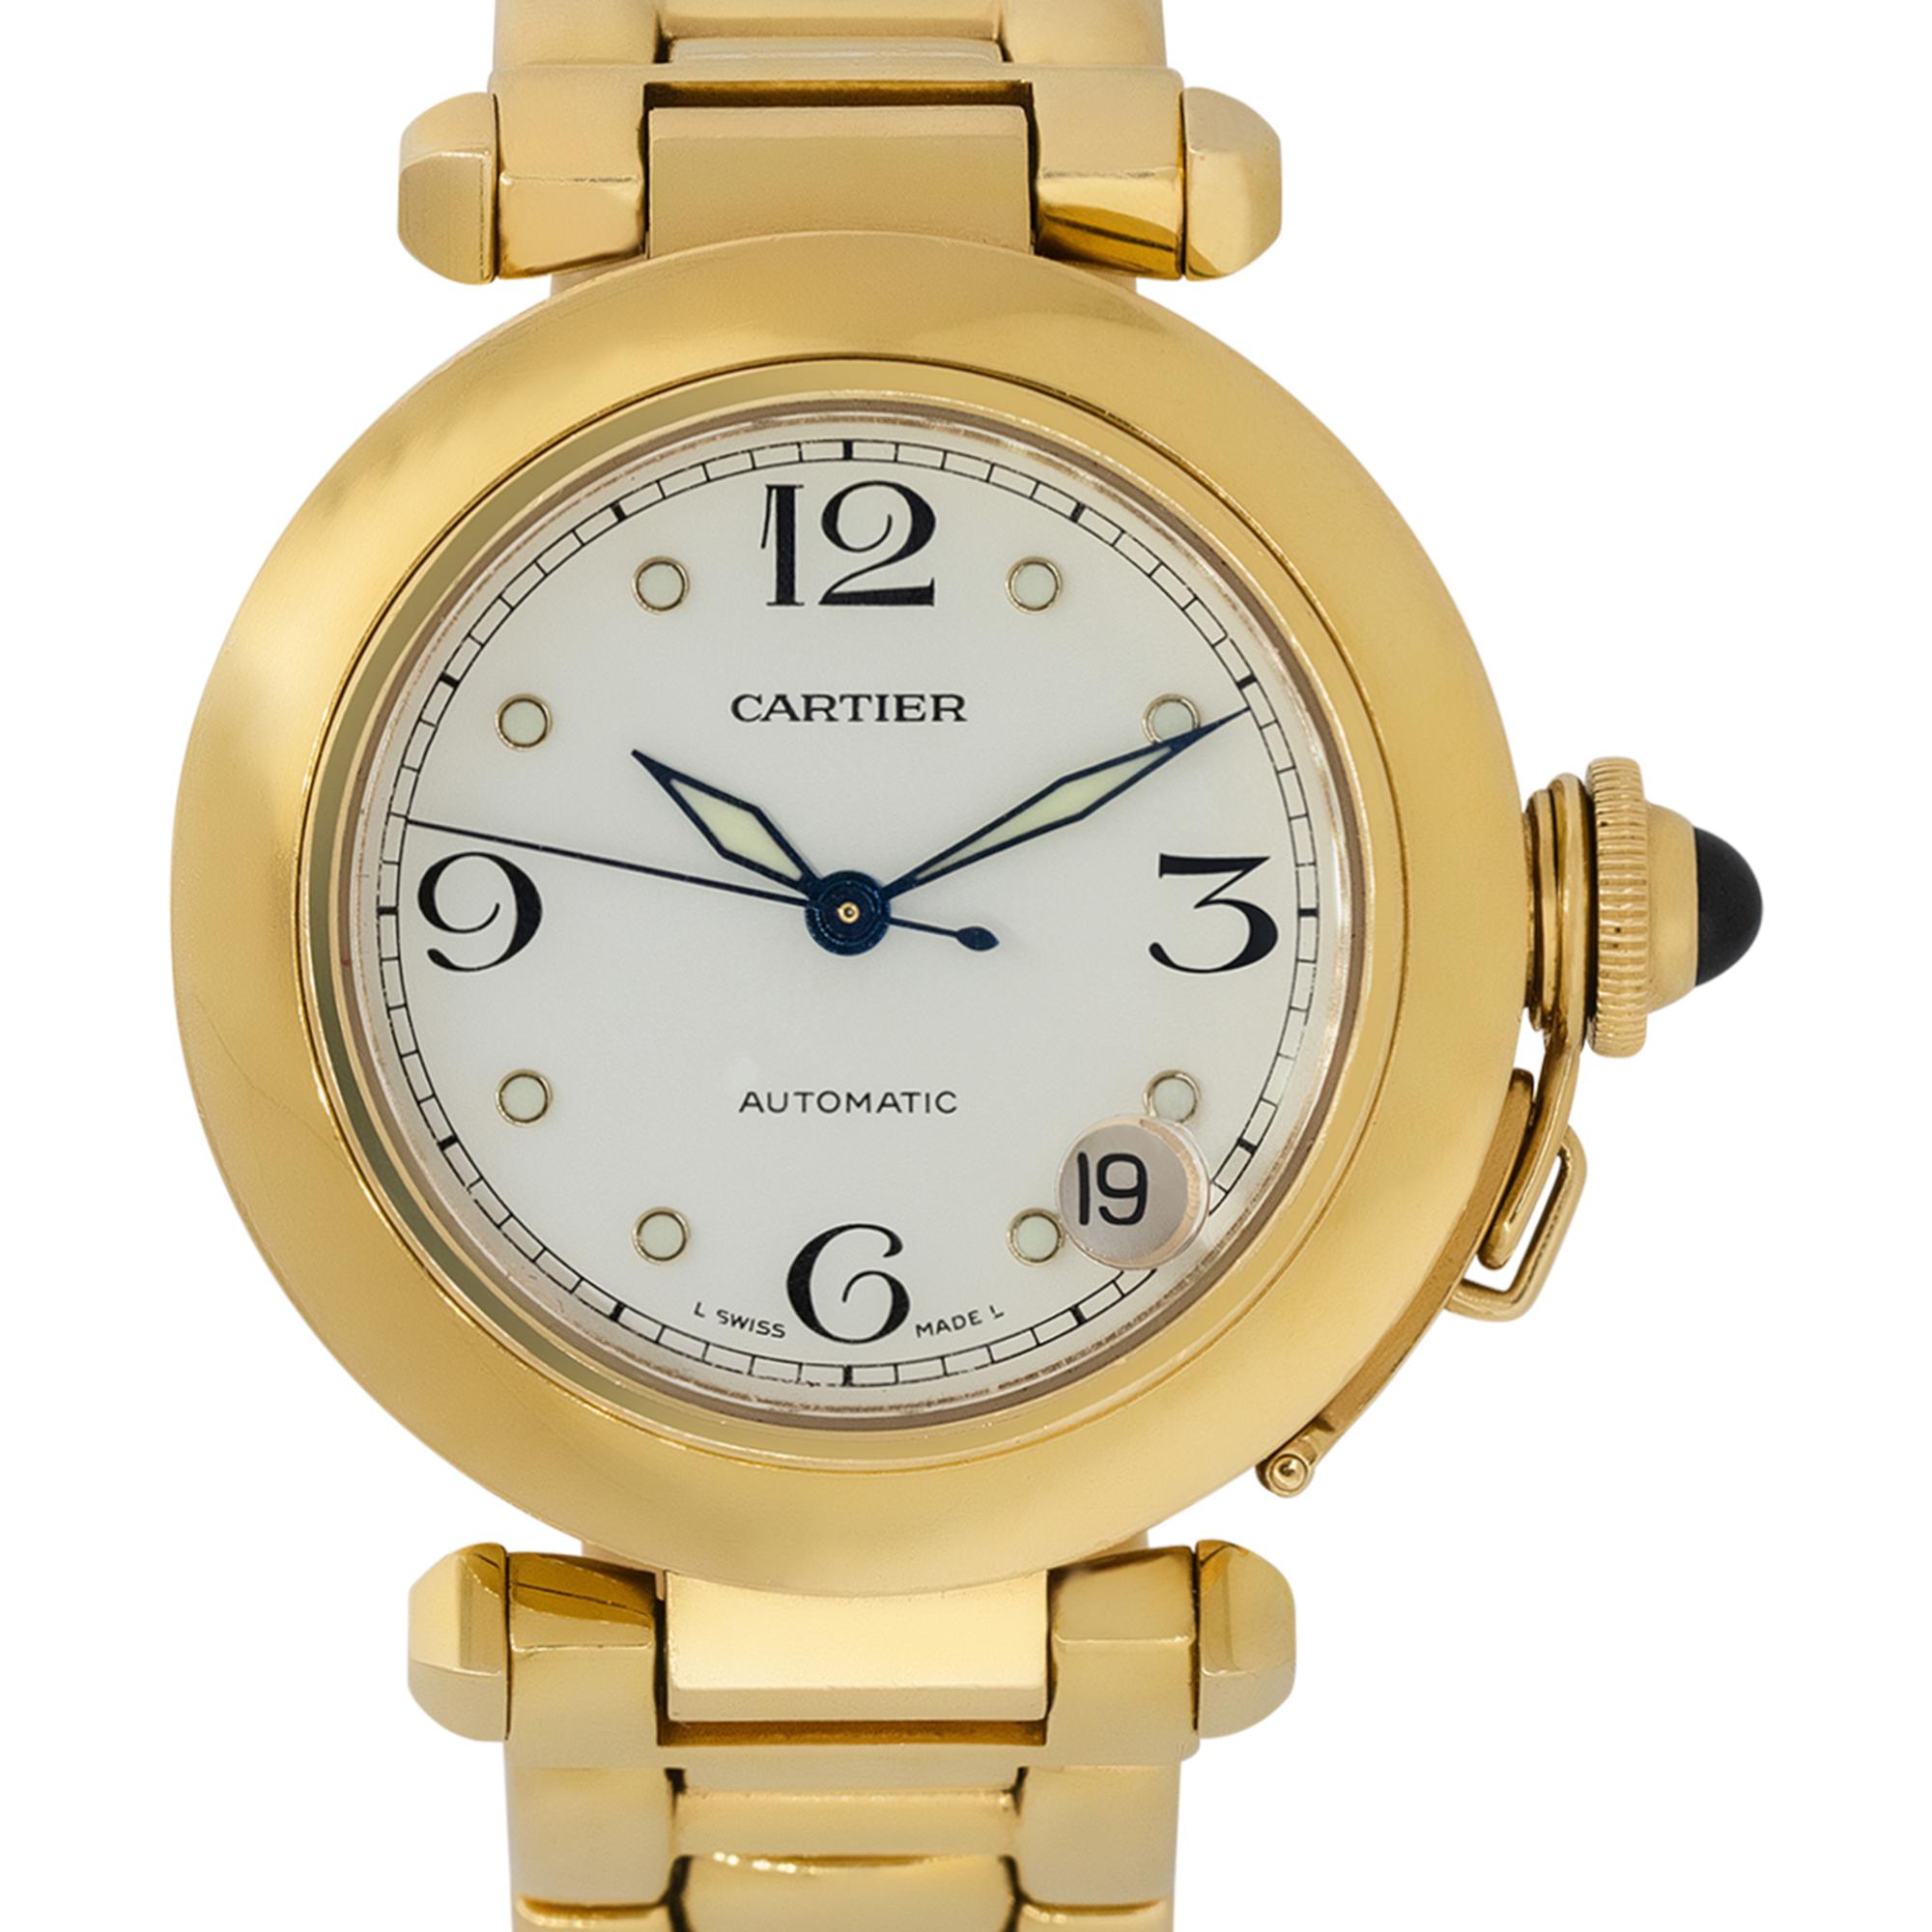 Brand: Cartier
MPN: 1035
Model: Pasha De Cartier
Case Material: 18k Yellow Gold
Case Diameter: 35mm
Crystal: Sapphire crystal
Bezel: 18k Yellow Gold
Dial: White dial with blue hands and date window between the 3 and 6 o'clock position
Bracelet: 18k